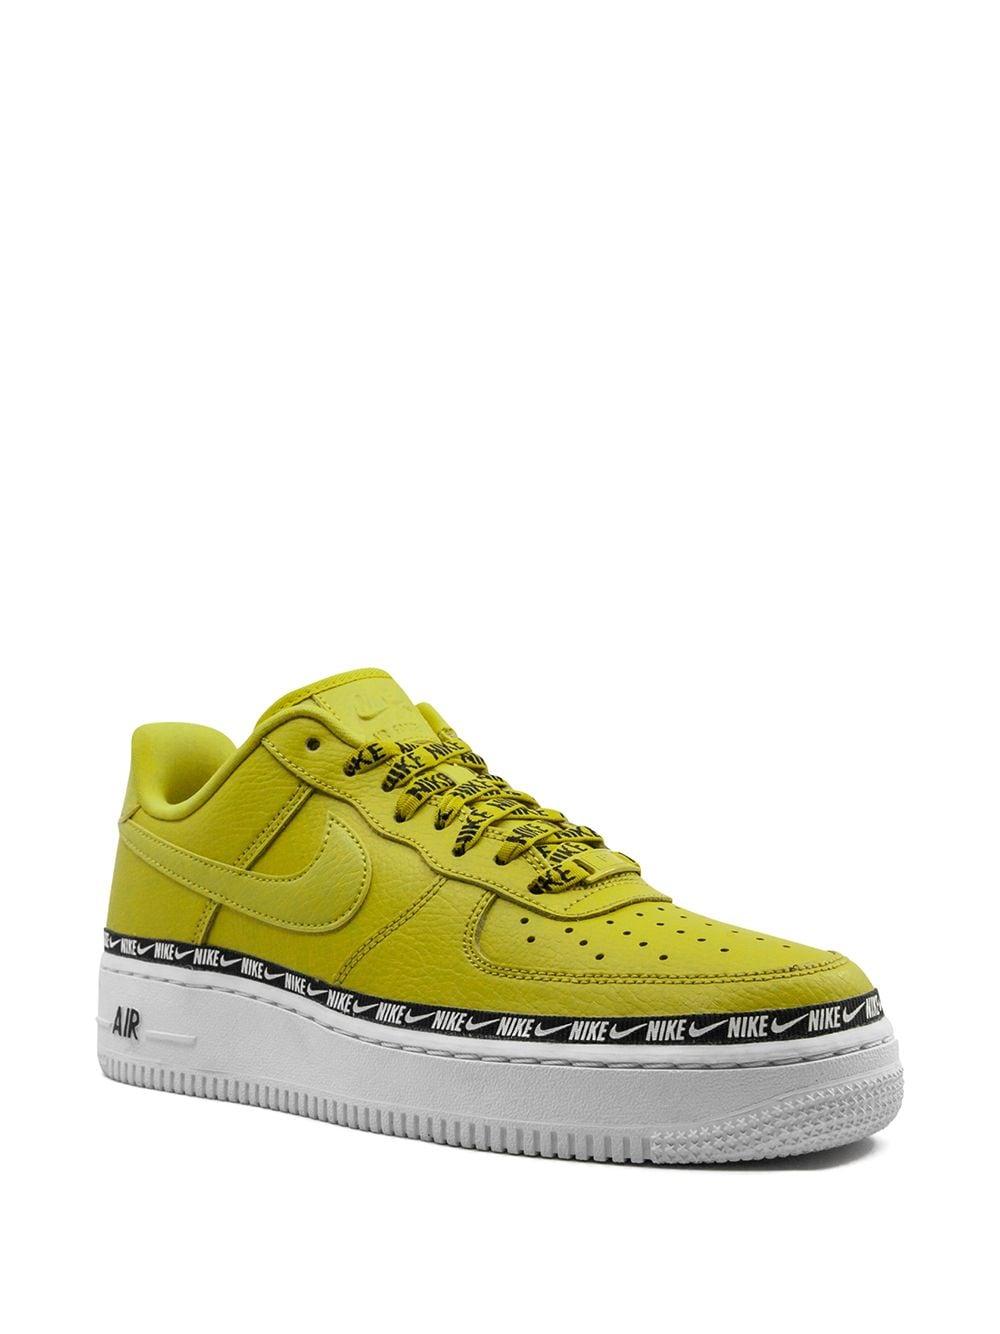 White & Yellow Air Force 1 07 Se Trainers Hotsell, SAVE 41% -  aveclumiere.com